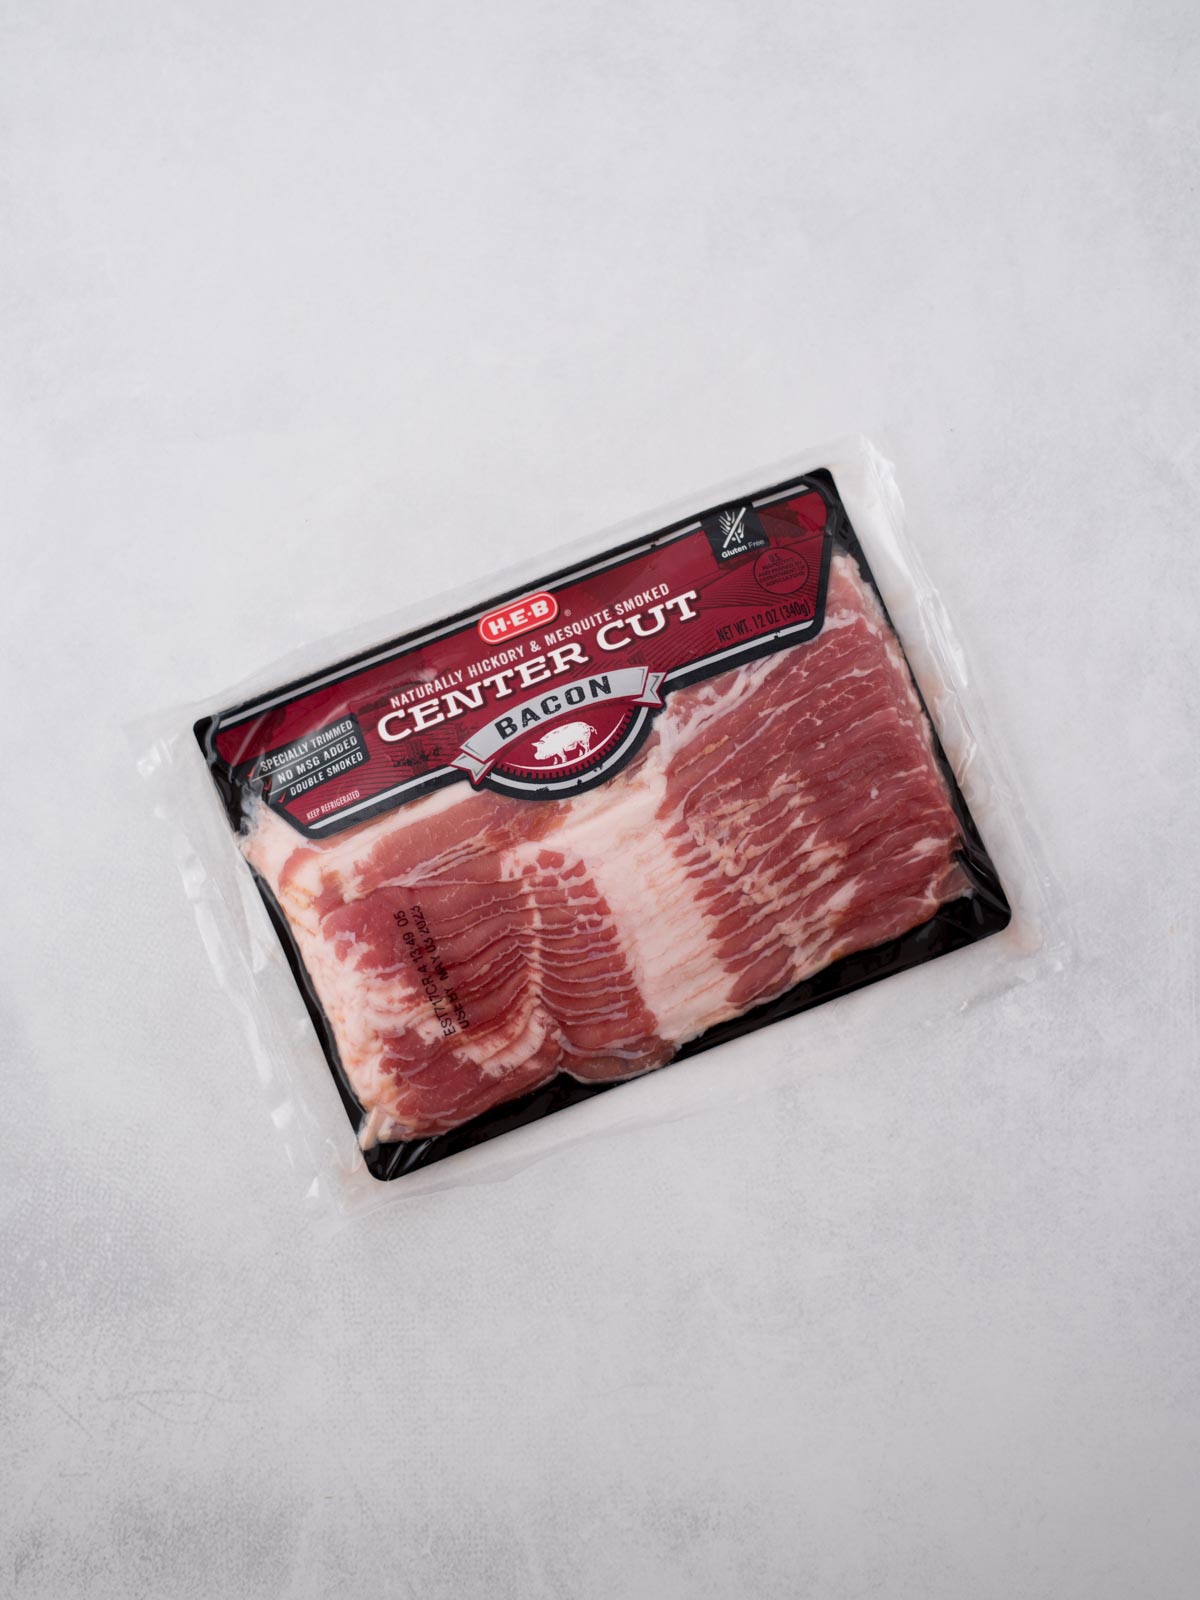 A pound of center cut bacon in the package.